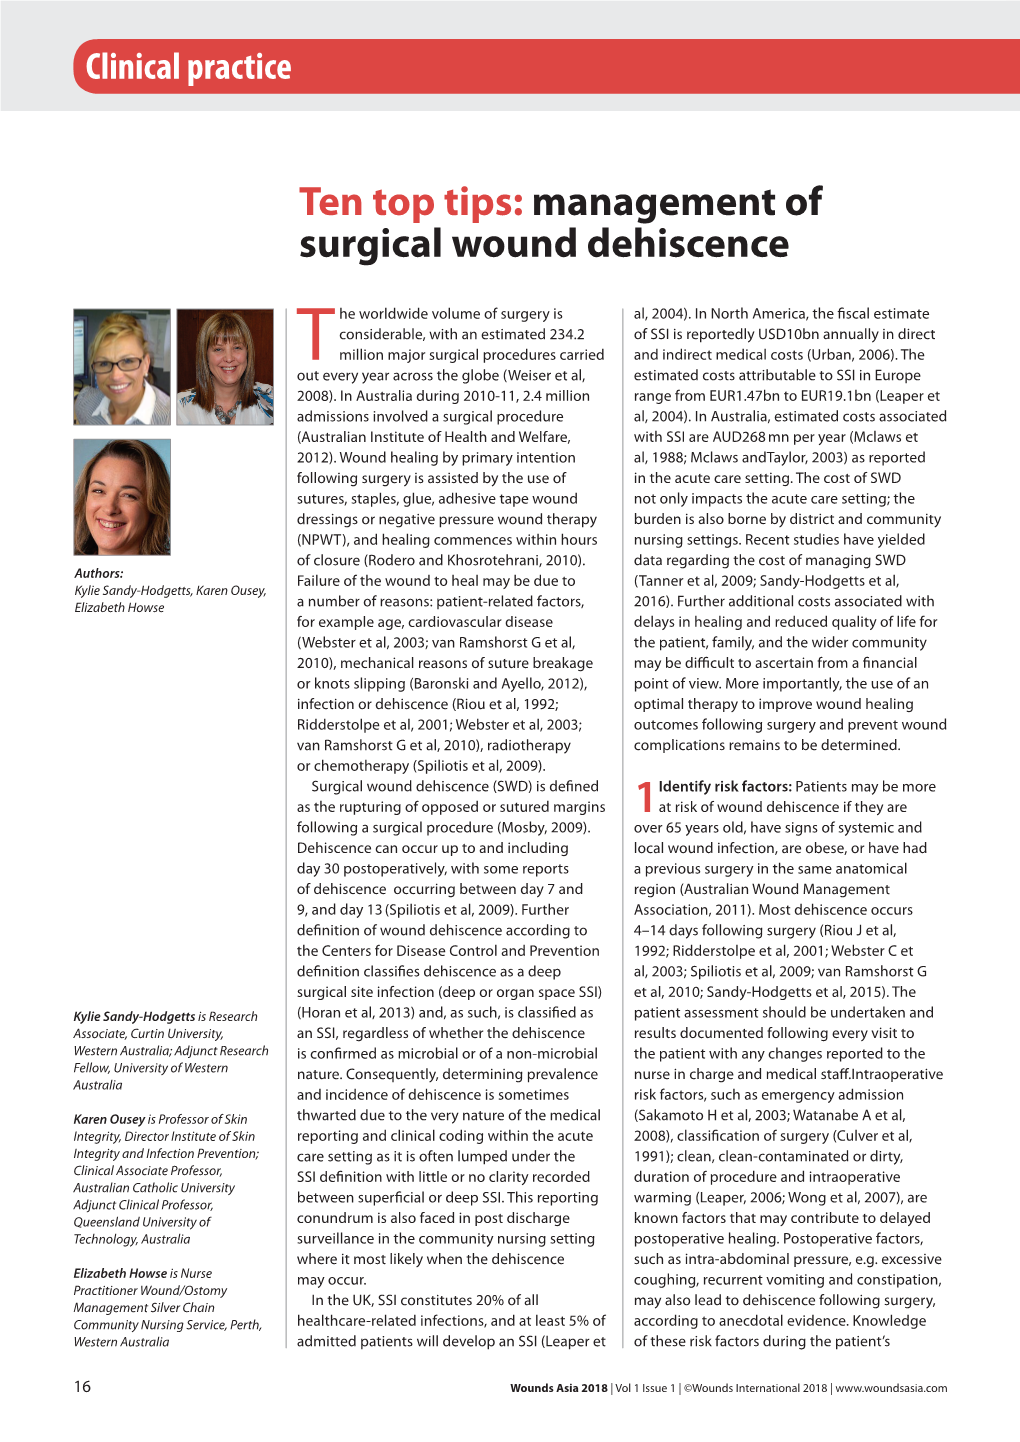 Management of Surgical Wound Dehiscence